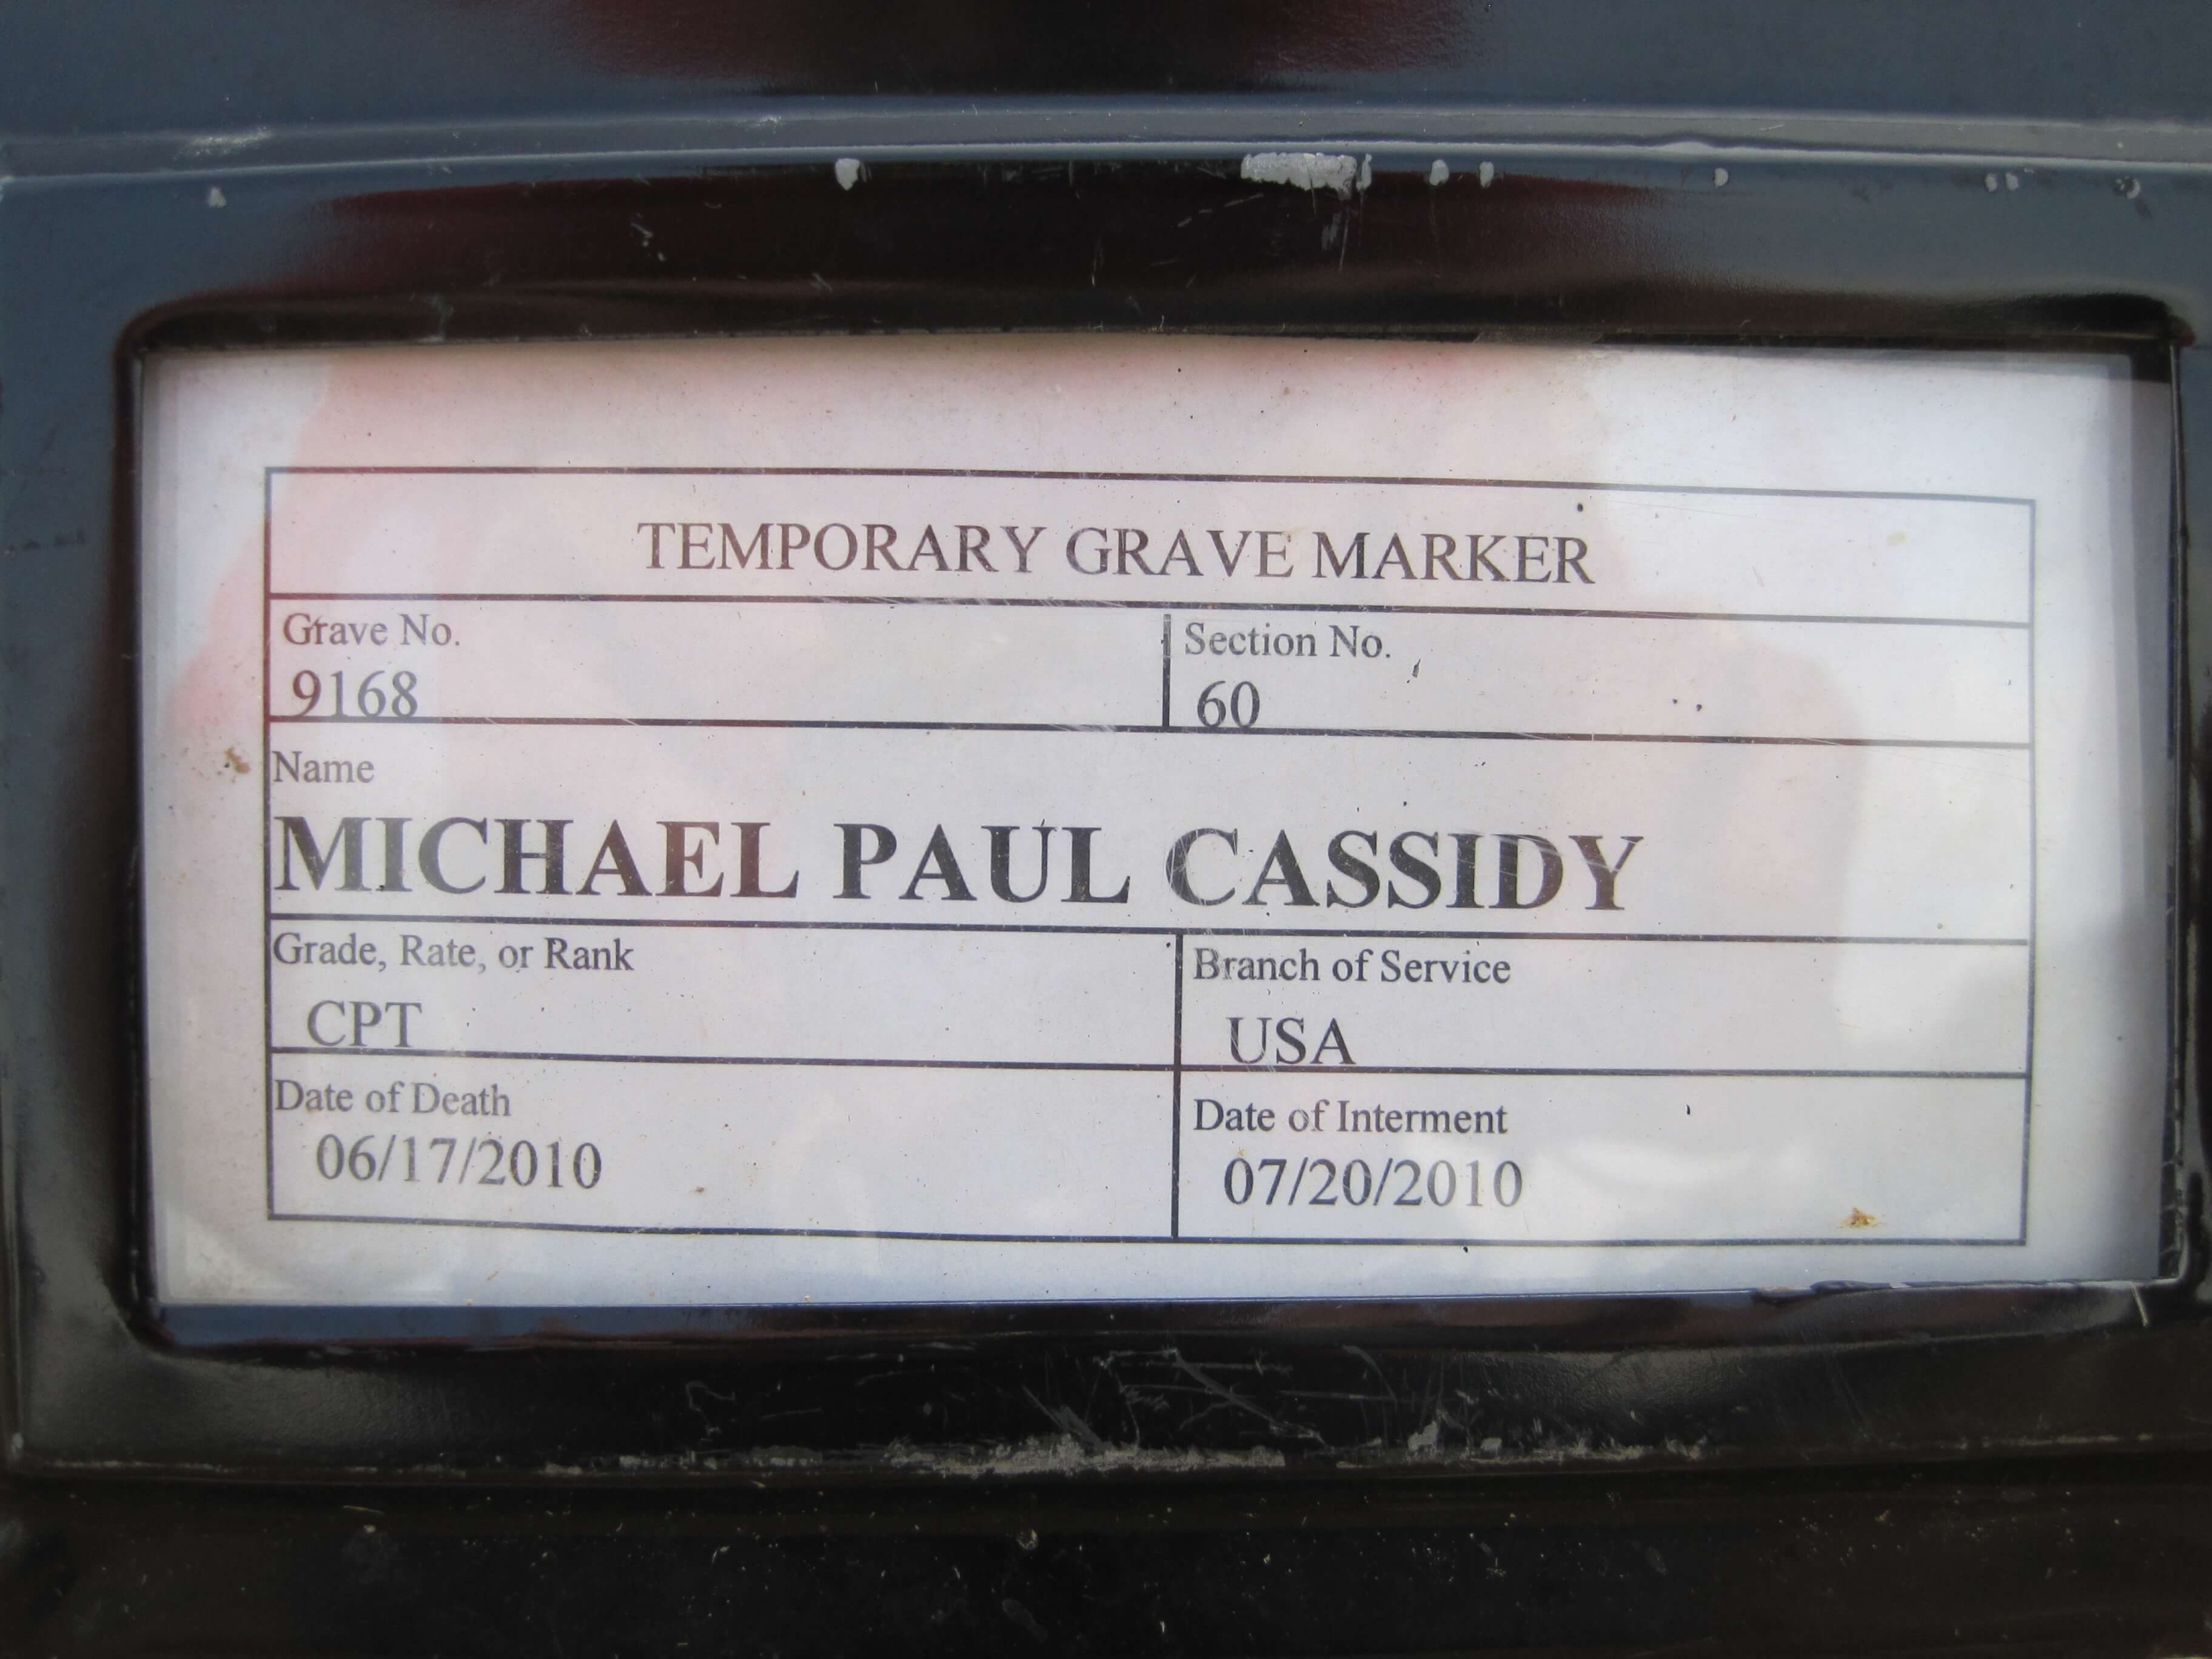 mpcassidy-gravesite-photo-by-eileen-horan-august-2010-001